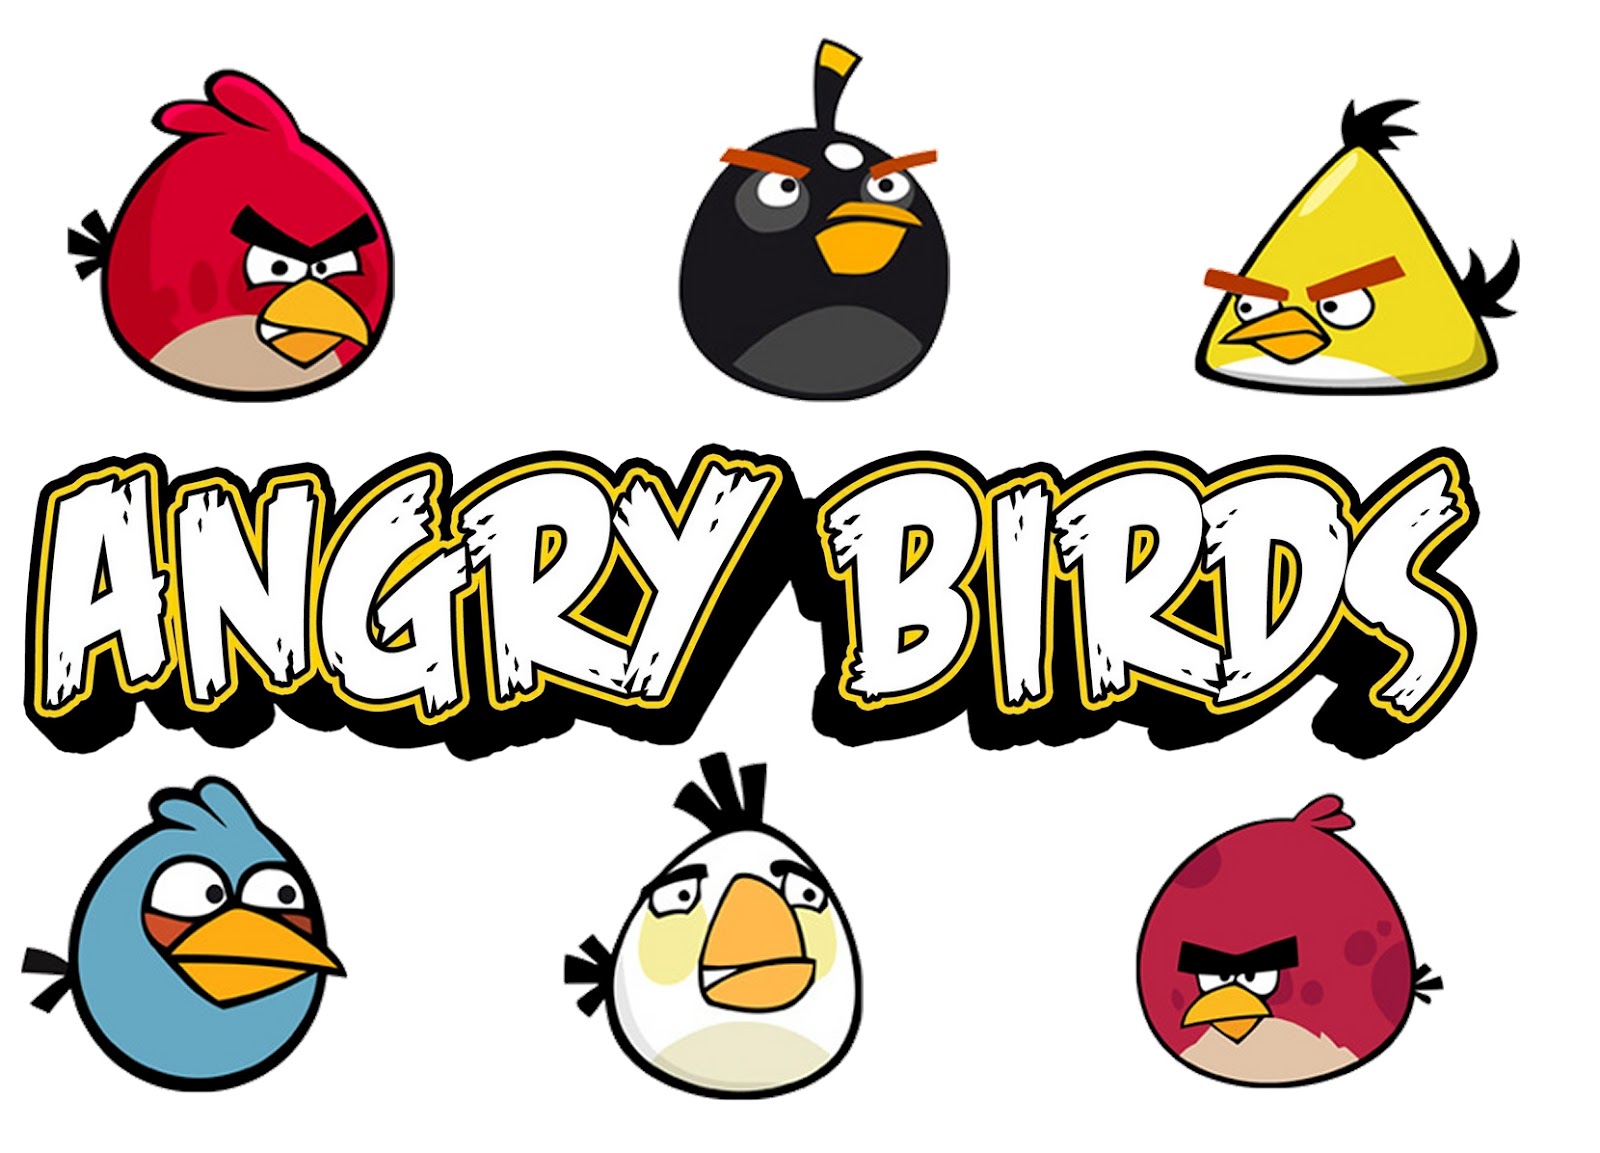 Angry Birds Free Party Printables, Backgrounds and Images. Oh My